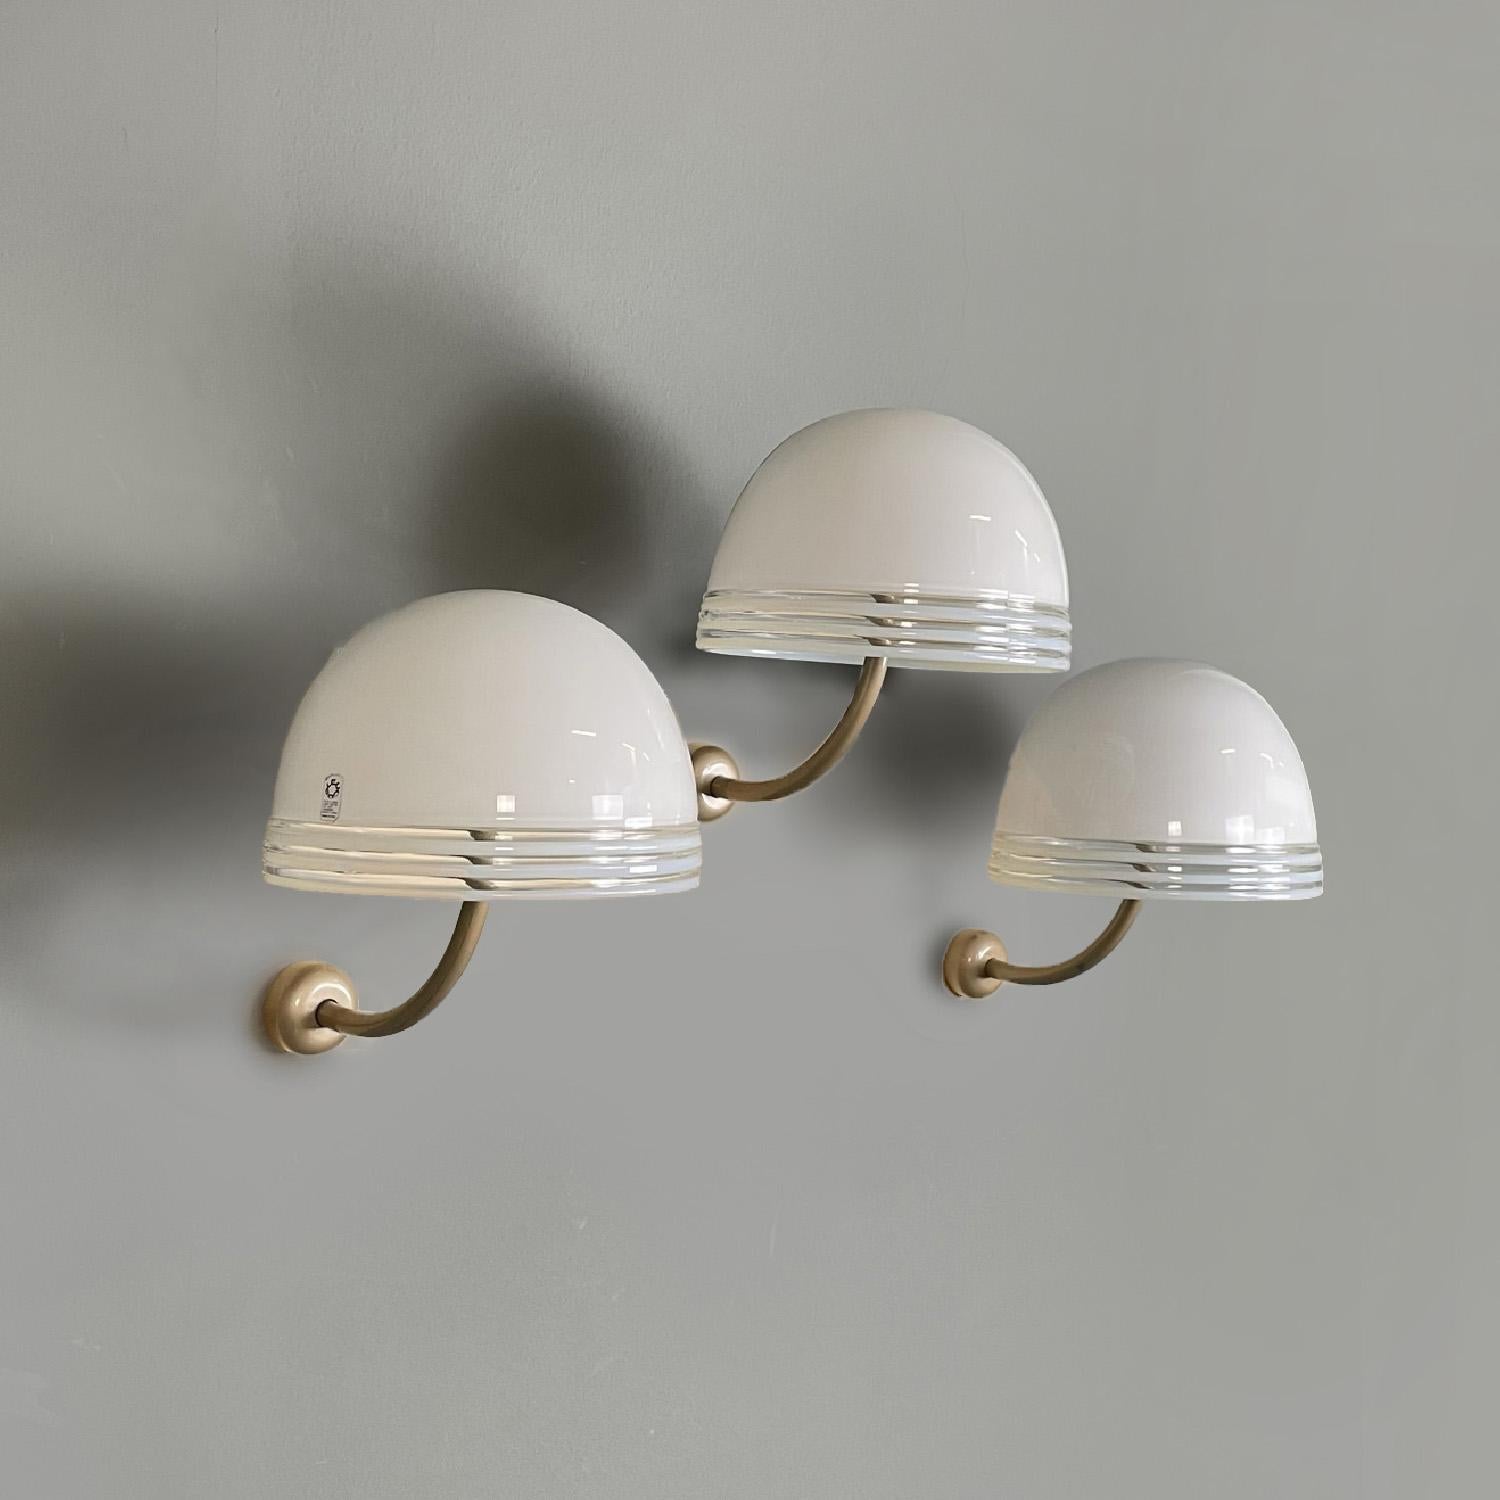 Italian modern Murano white glass and golden metal appliques by Leucos, 1980s

Set of three round base appliques. The diffuser is a hemisphere in white Murano glass, at the edges there are three decorative lines in transparent glass. The support